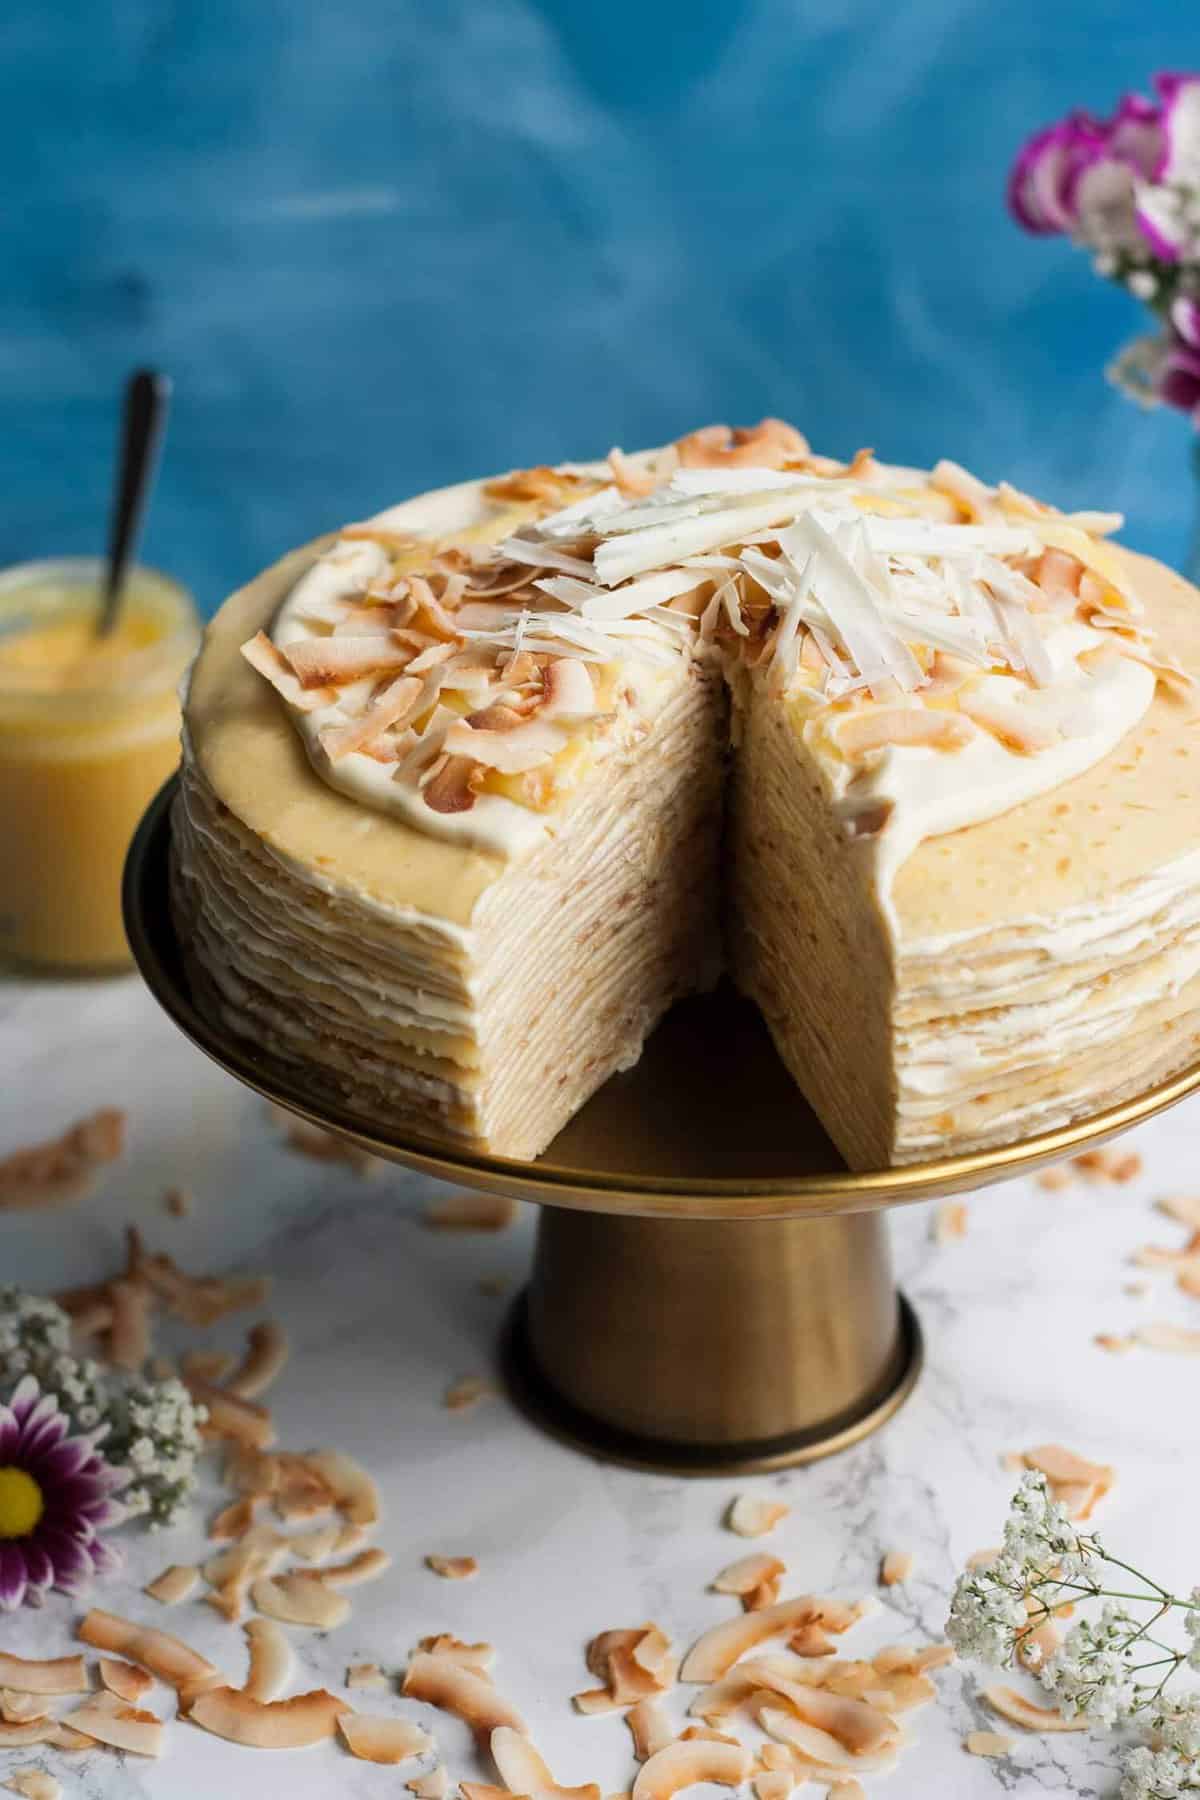 White Chocolate Lemon Curd Crepe Cake - why not try making this gorgeous mille crepe cake as a perfect showstopper centrepiece for Pancake Day or any celebration you can think of! | eatloveeats.com